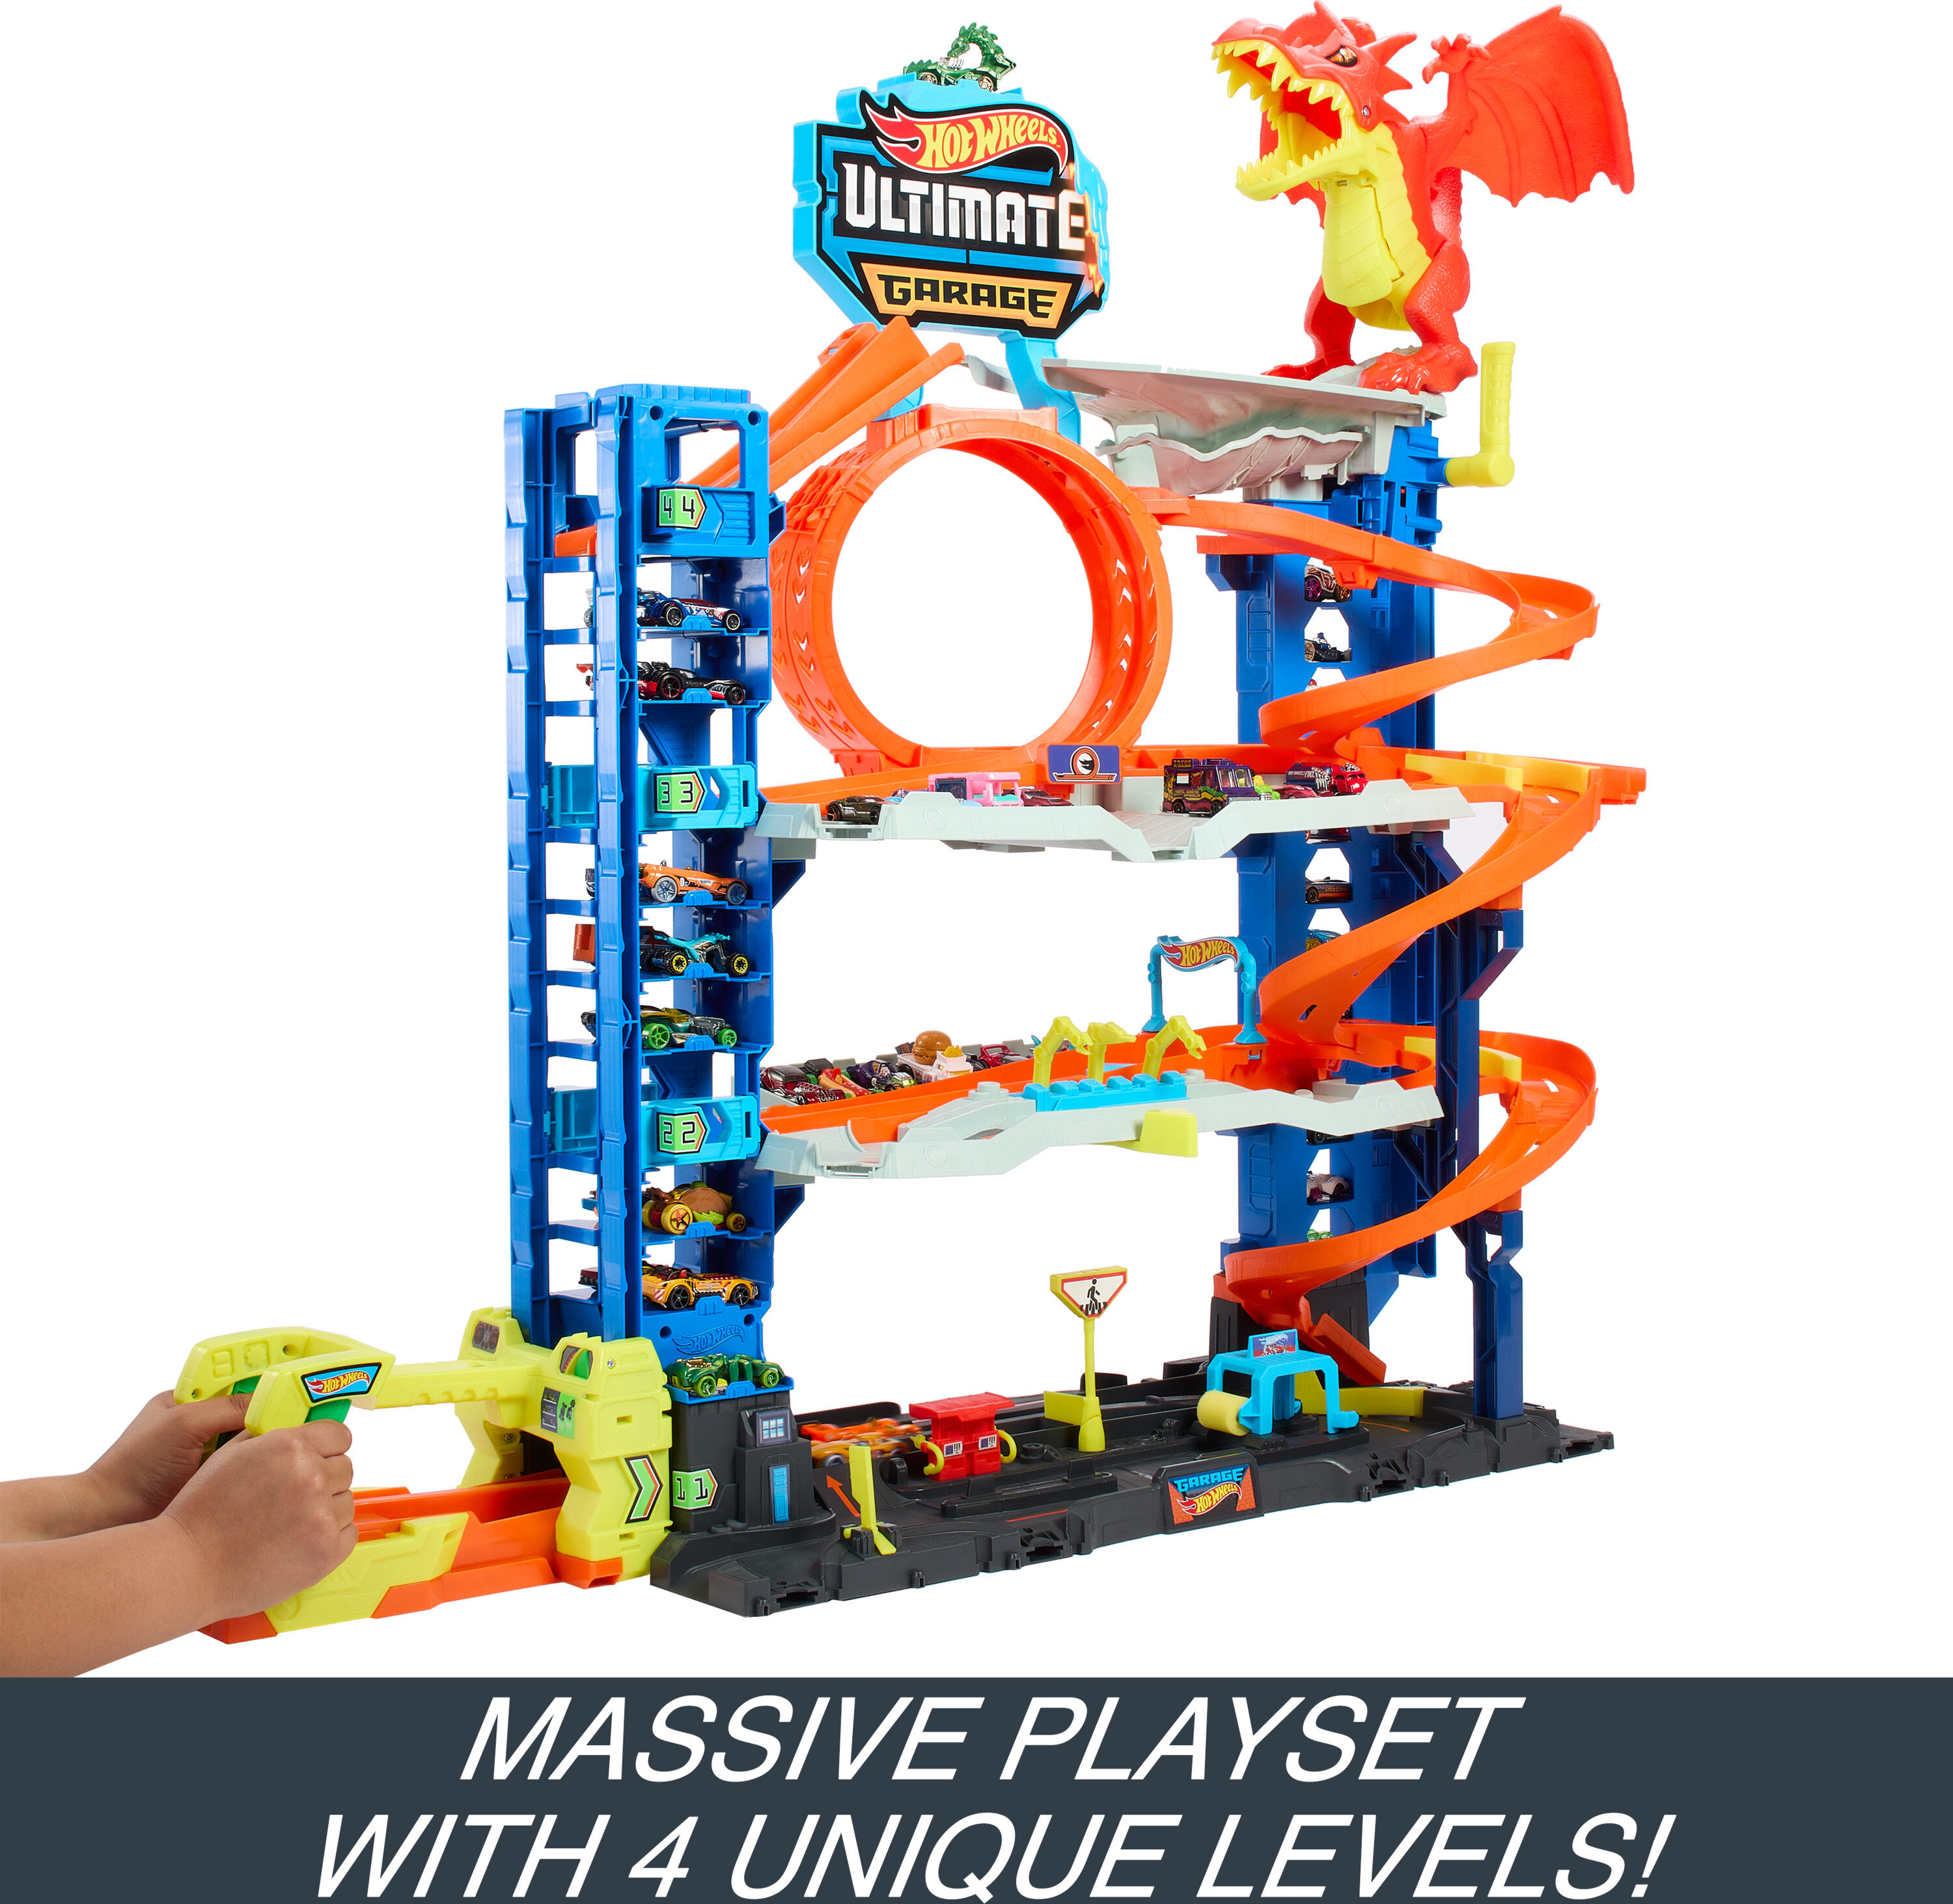 Hot Wheels City Ultimate Garage Playset with 2 Die-Cast Cars, Toy Storage for 50+ Cars for Kids Age 4-8 - image 4 of 7